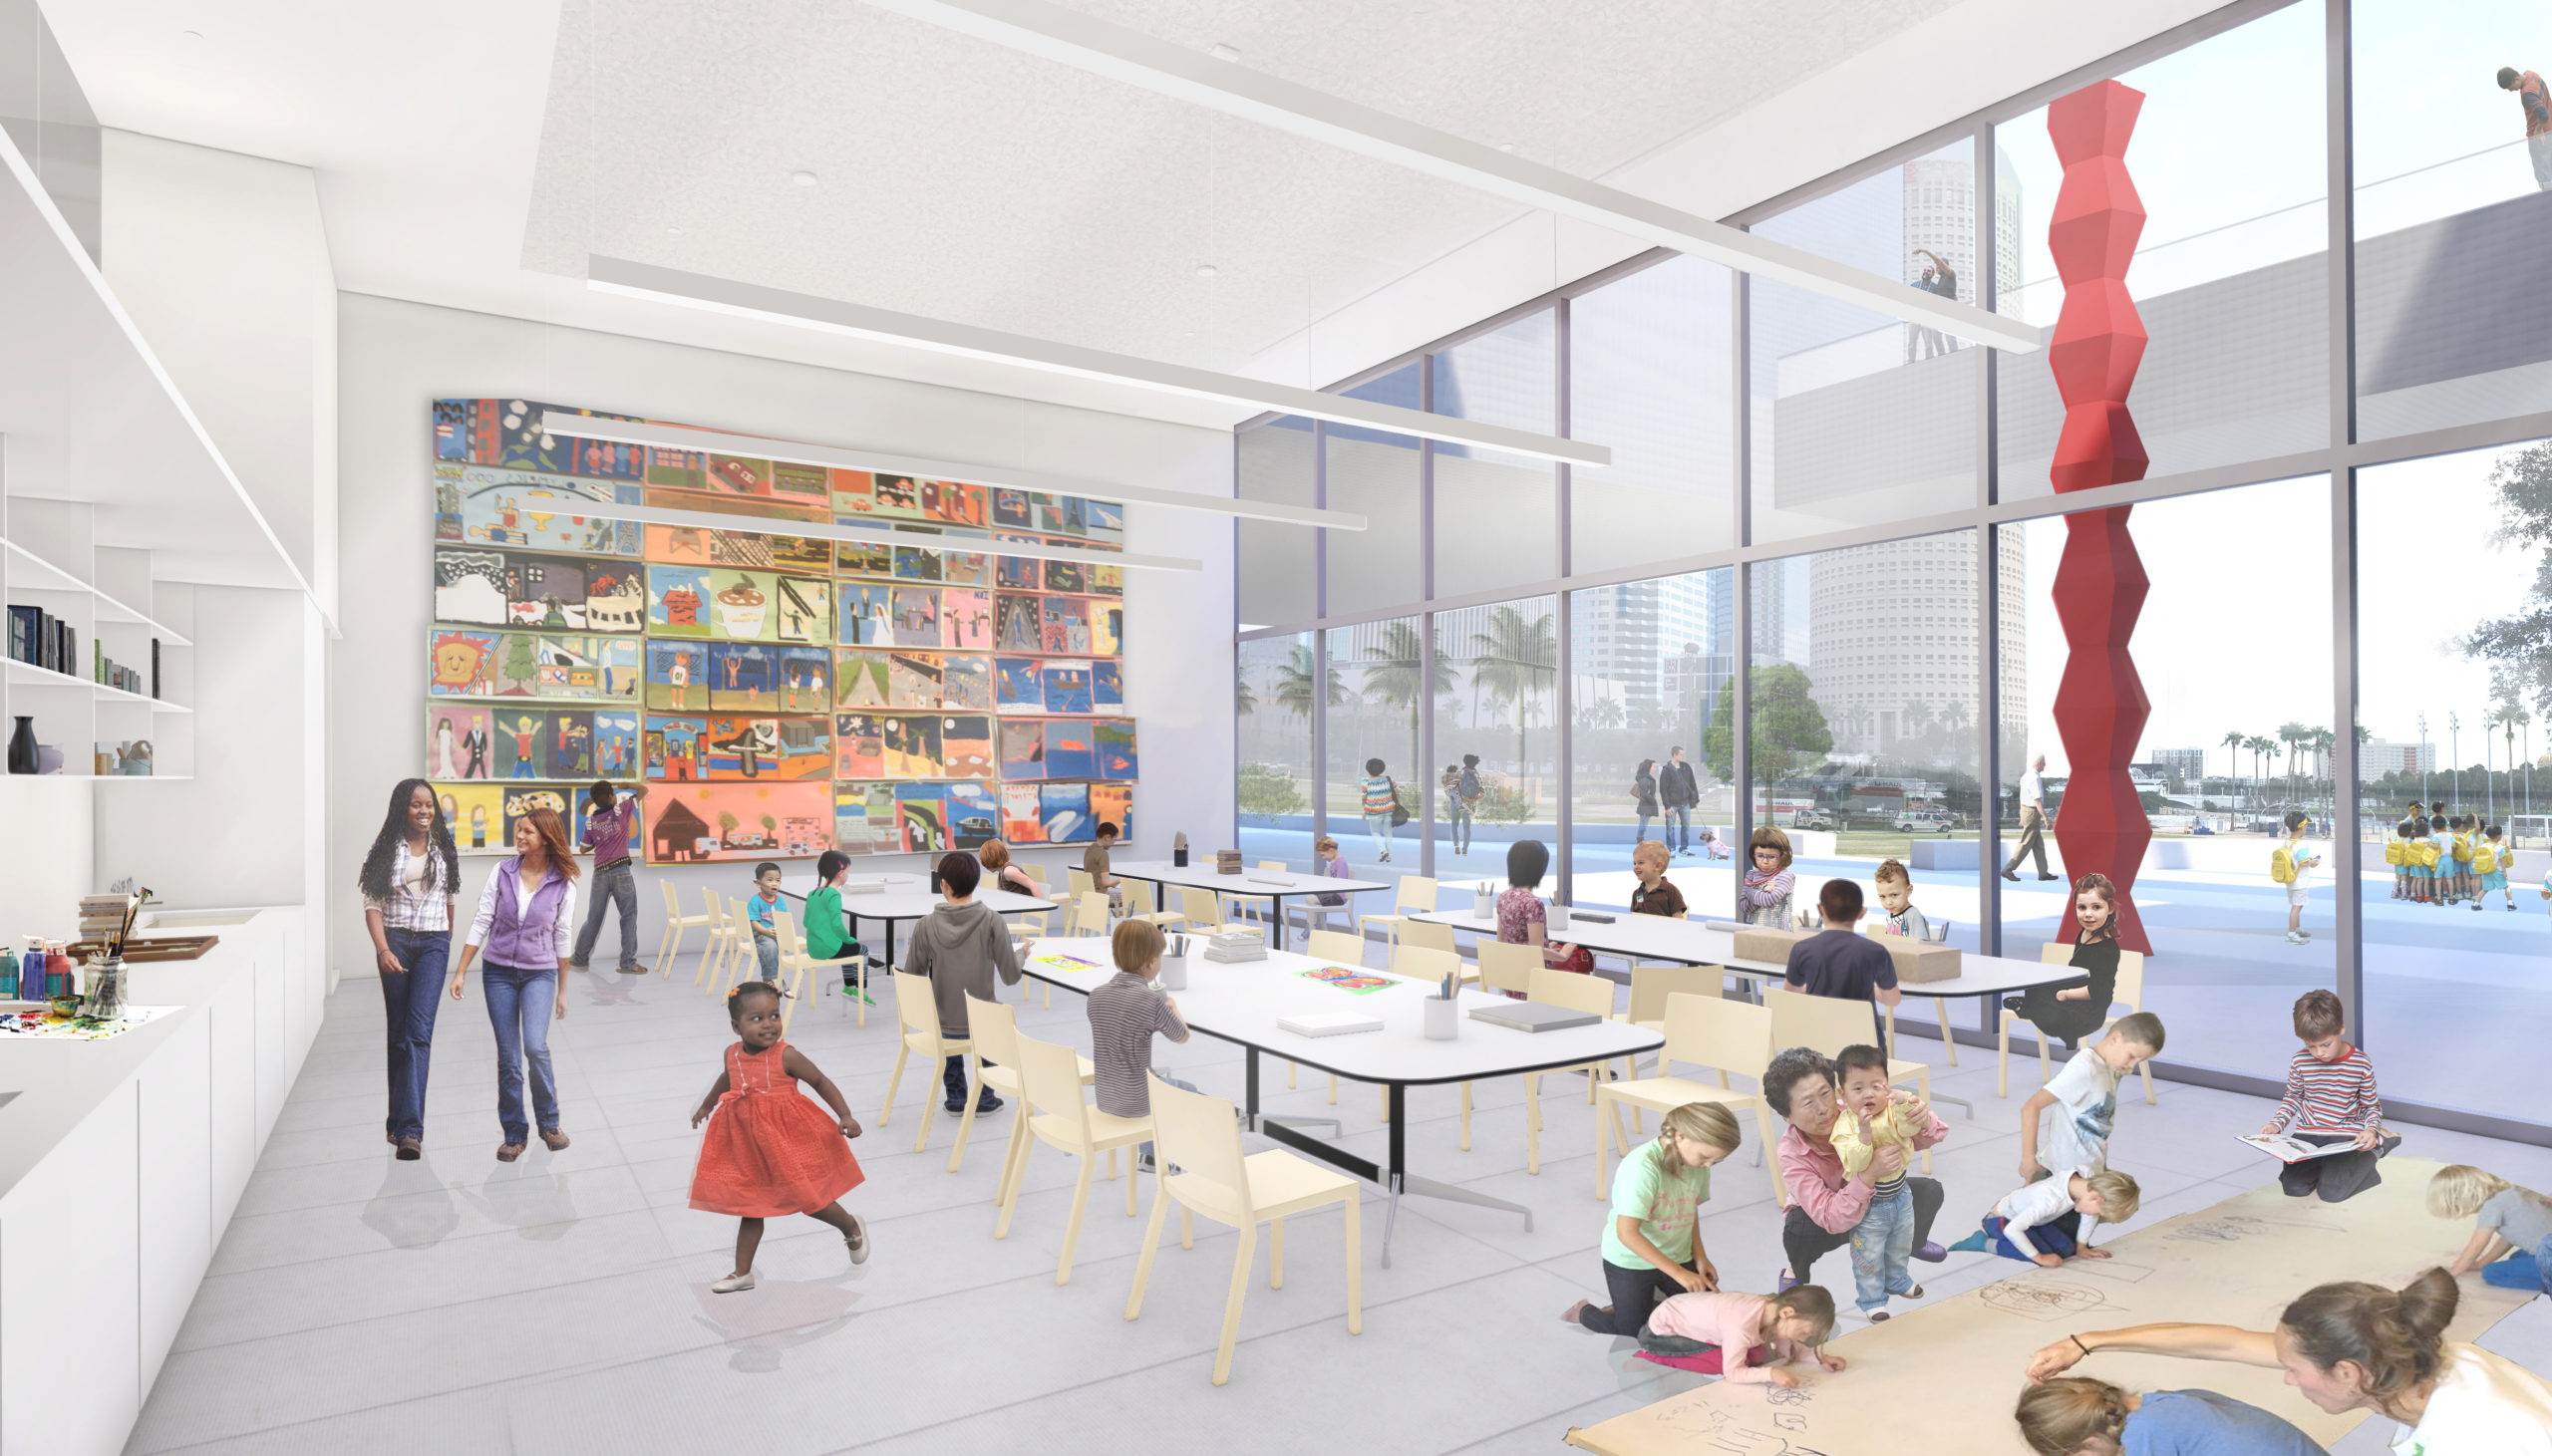 Rendering of new art education classroom at the Tampa Museum of Art. WEISS/MANFREDI